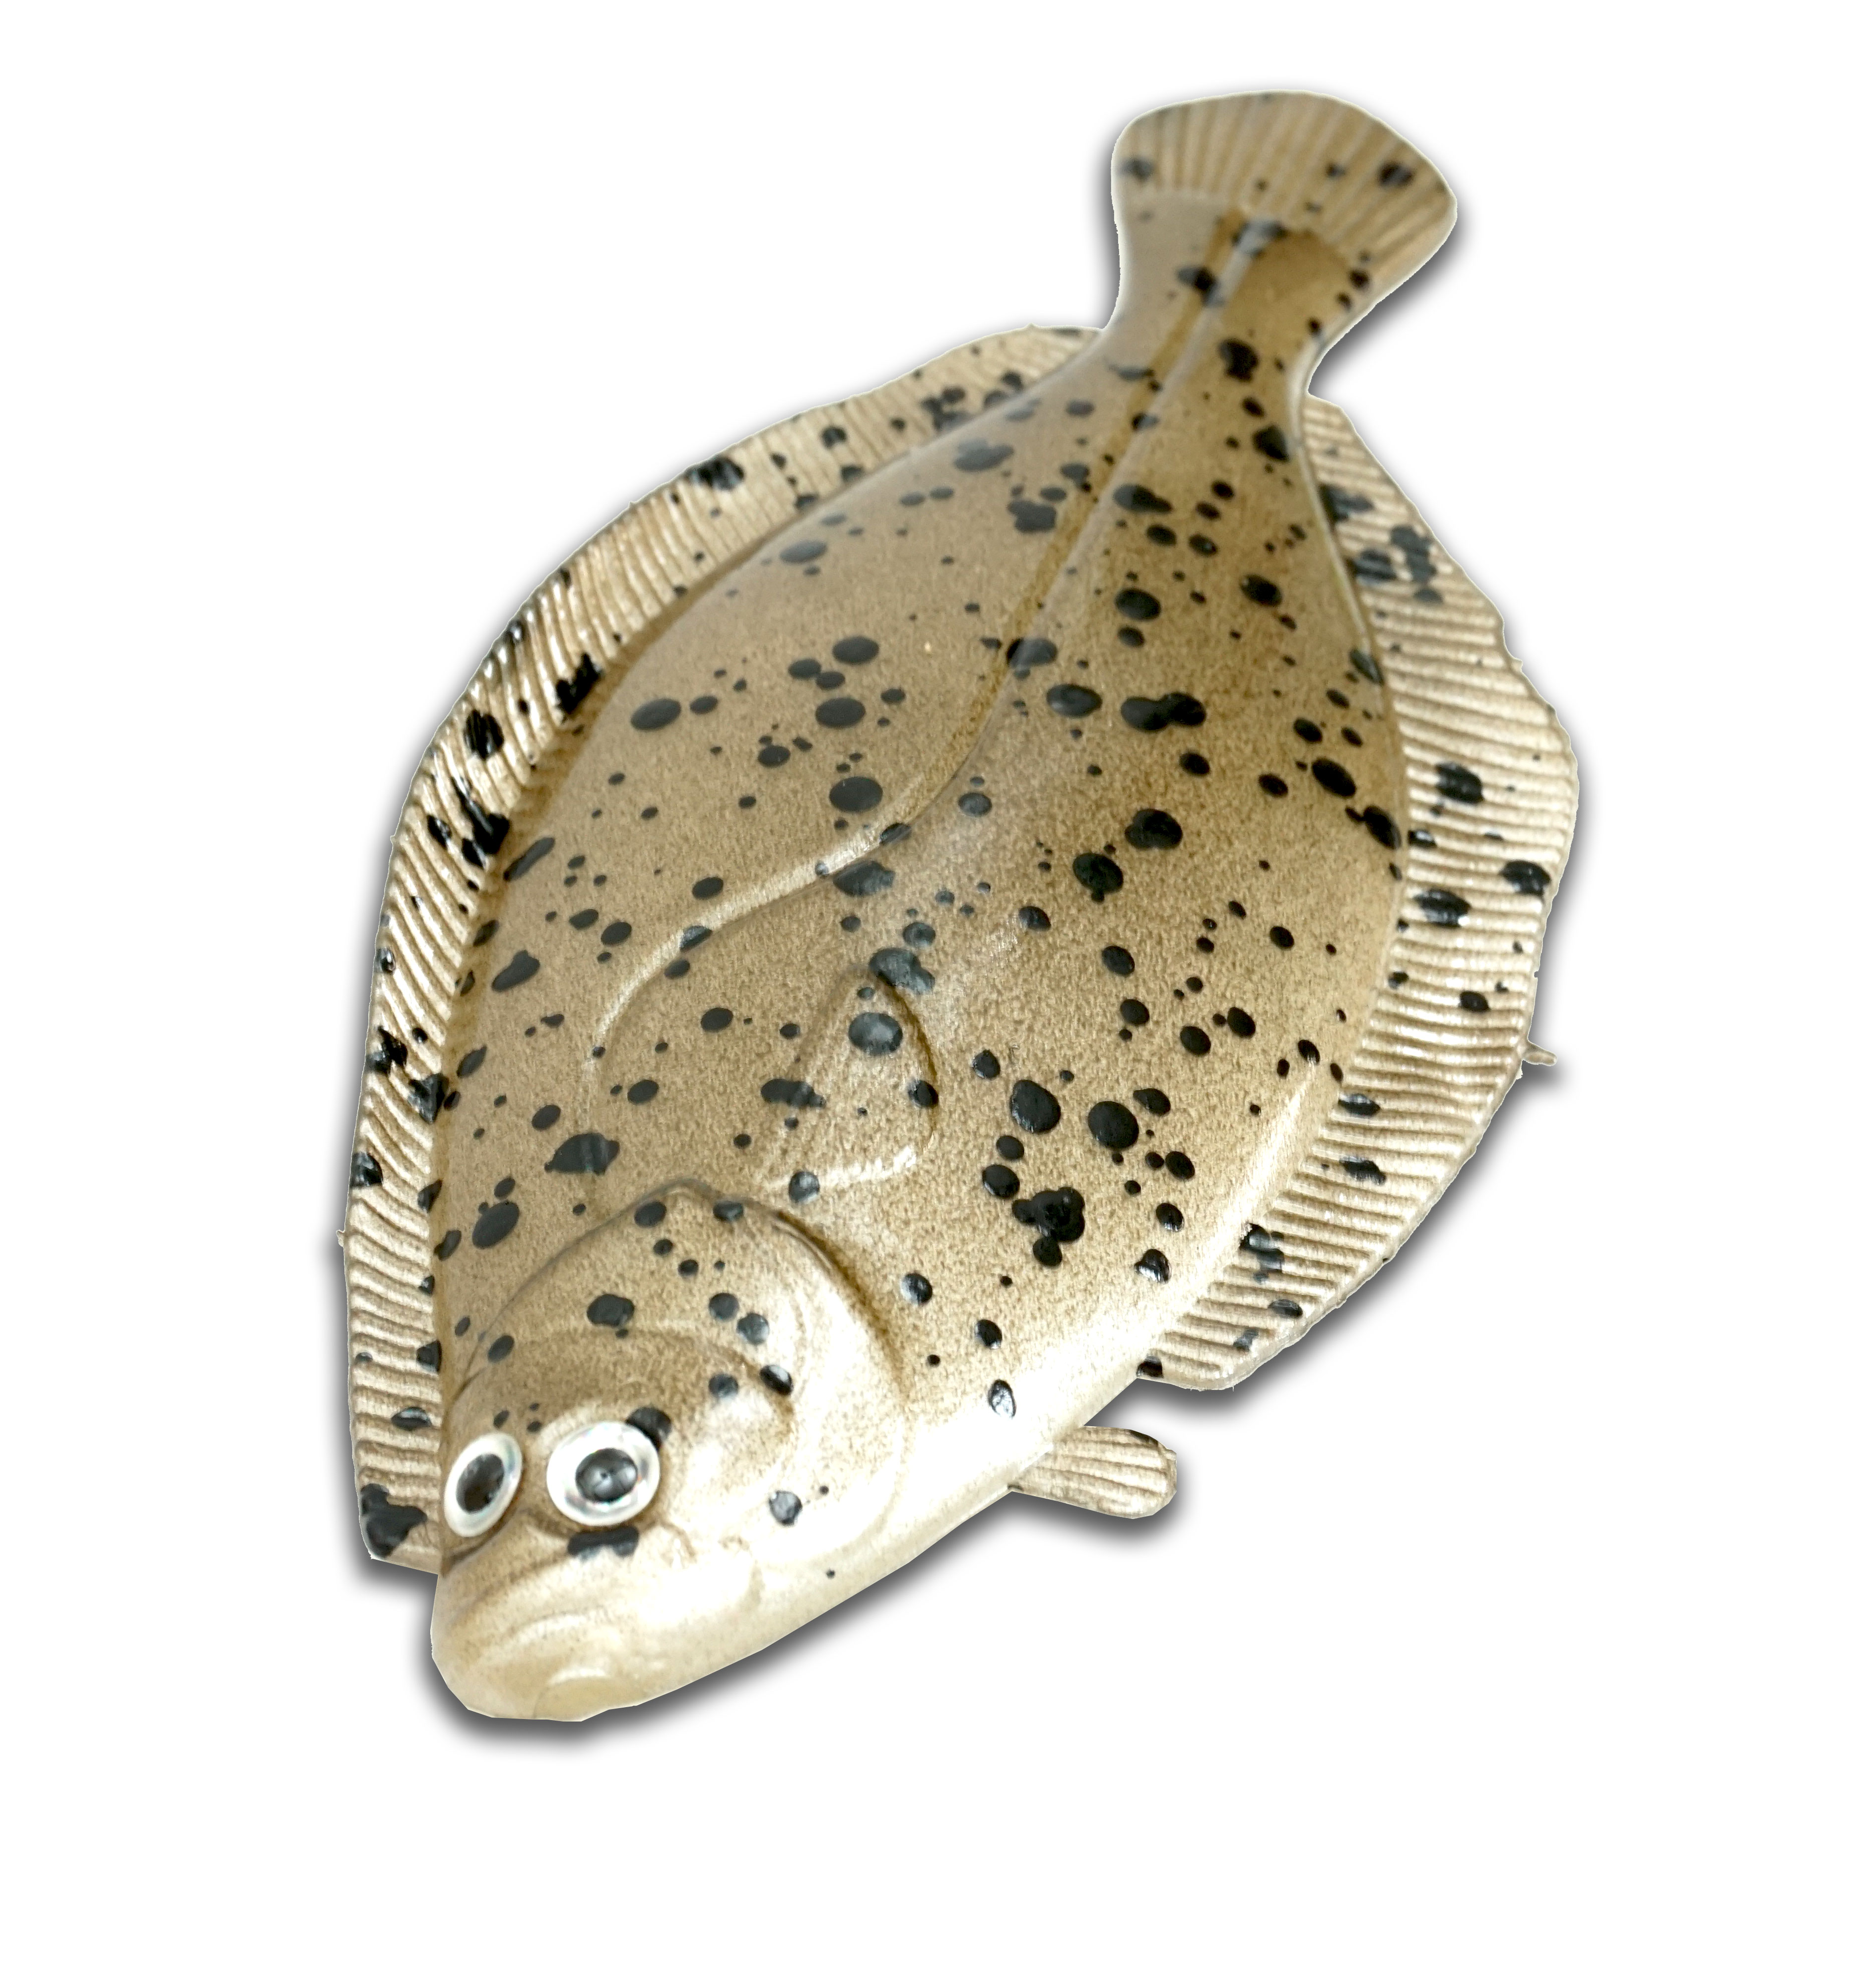 Flounder : Almost Alive Lures, The best there ever was.